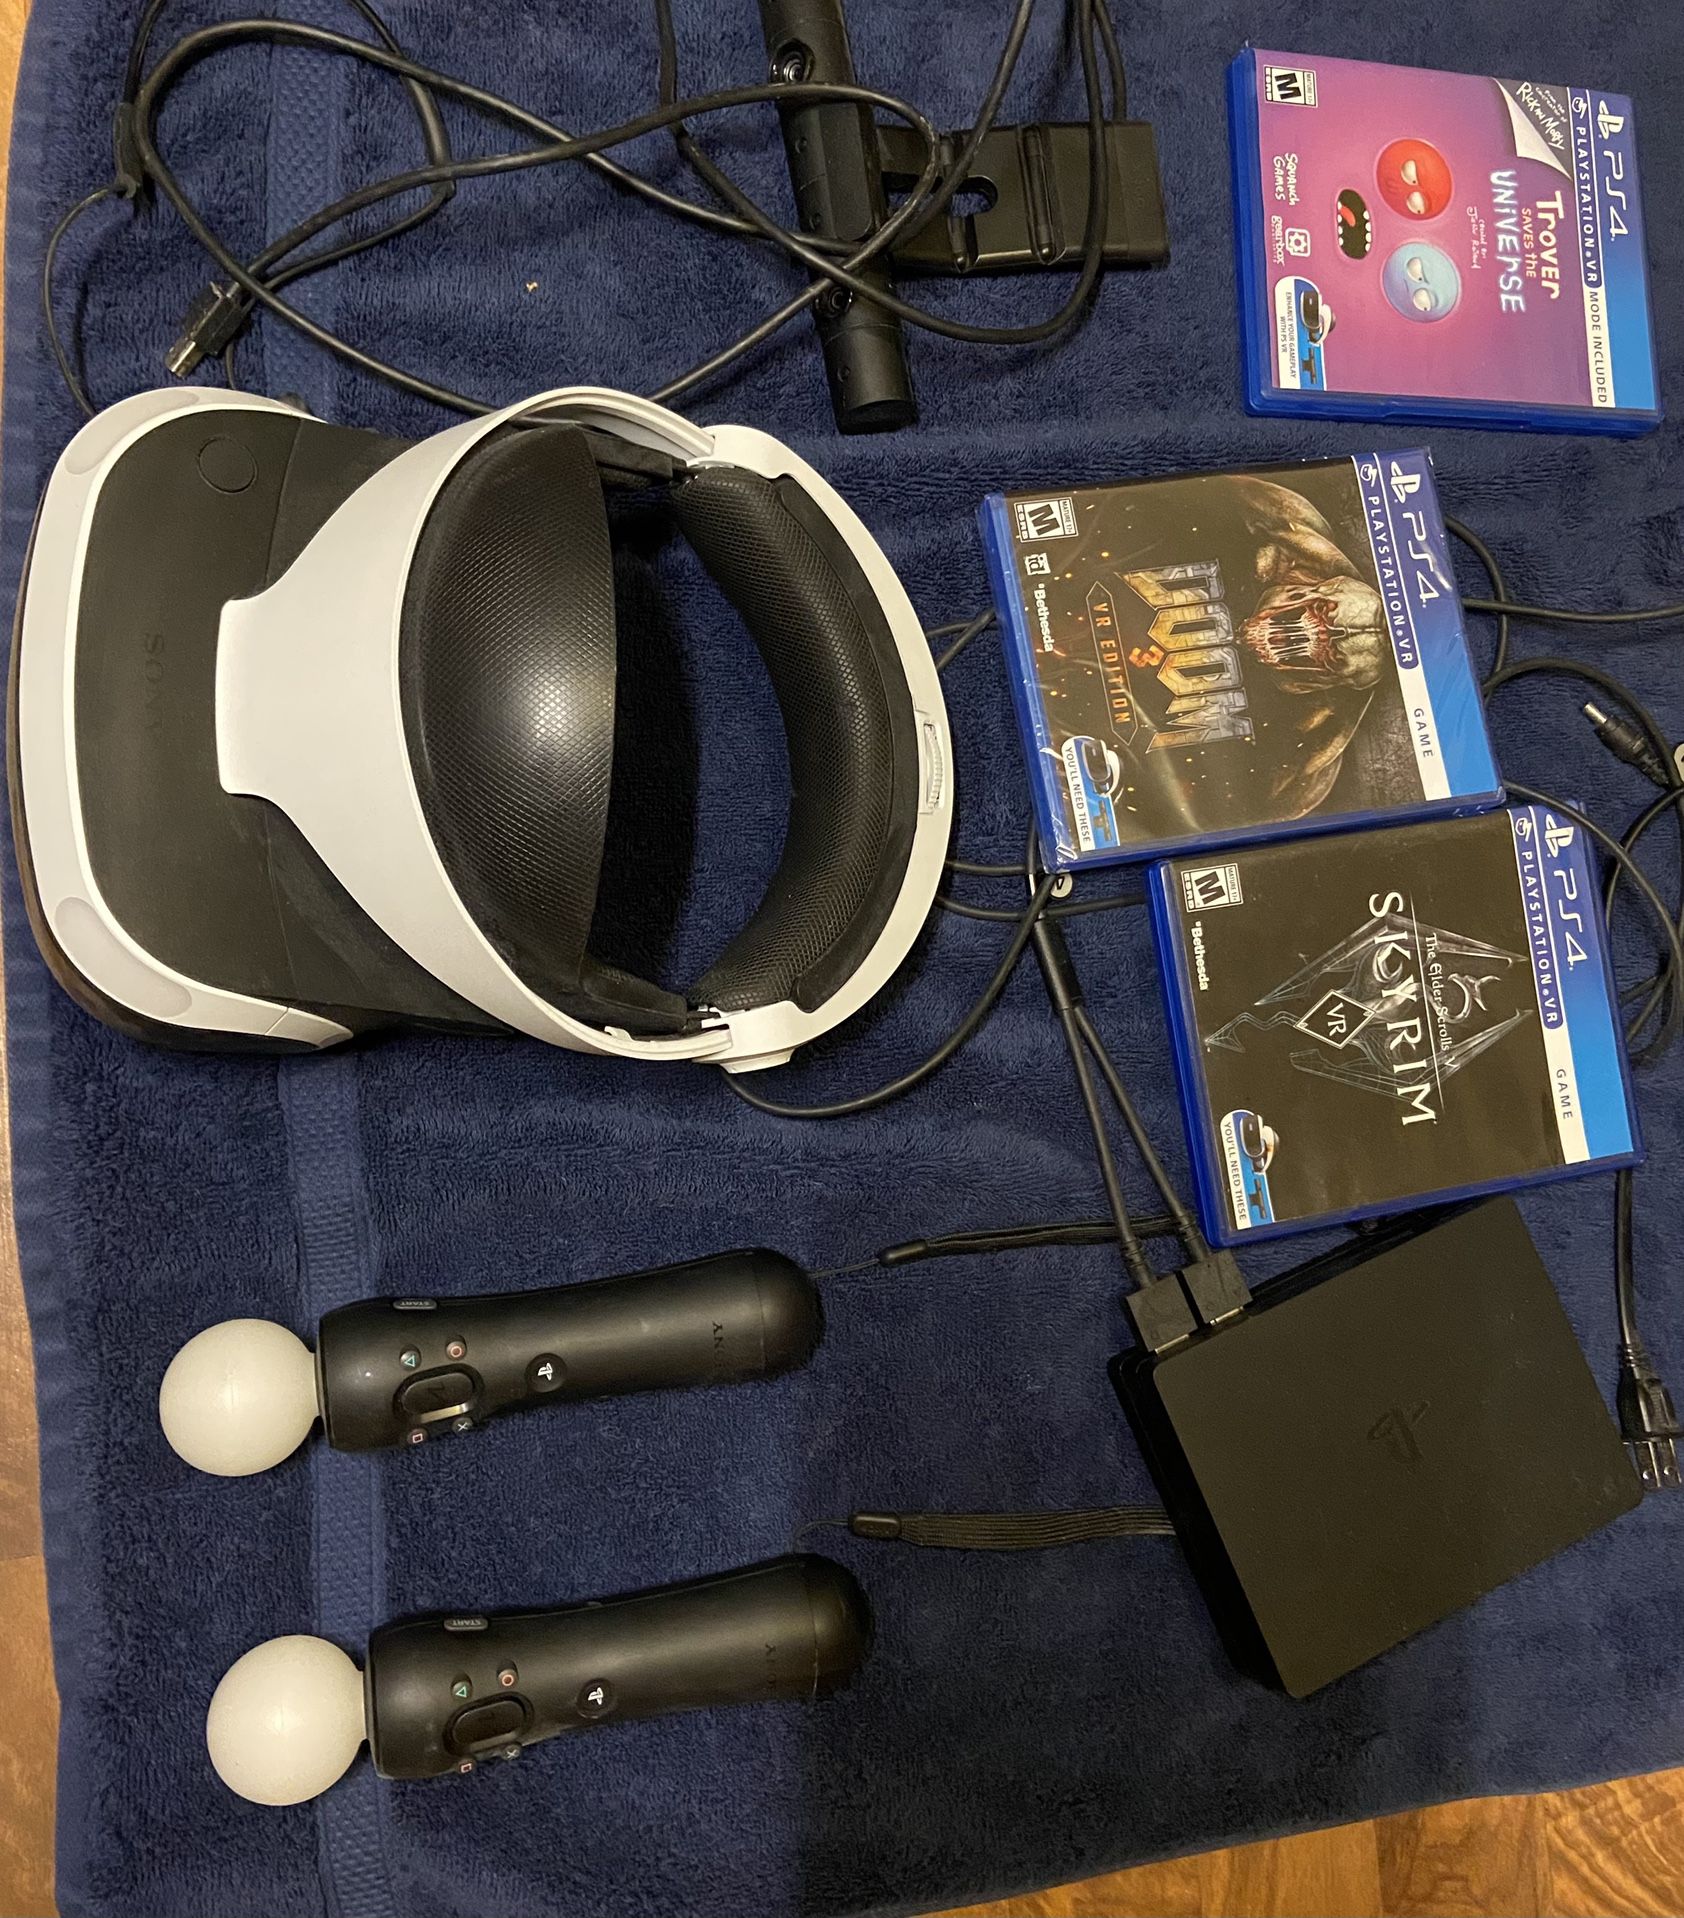 PSVR System w/ 2 Move Controllers and 3 Games